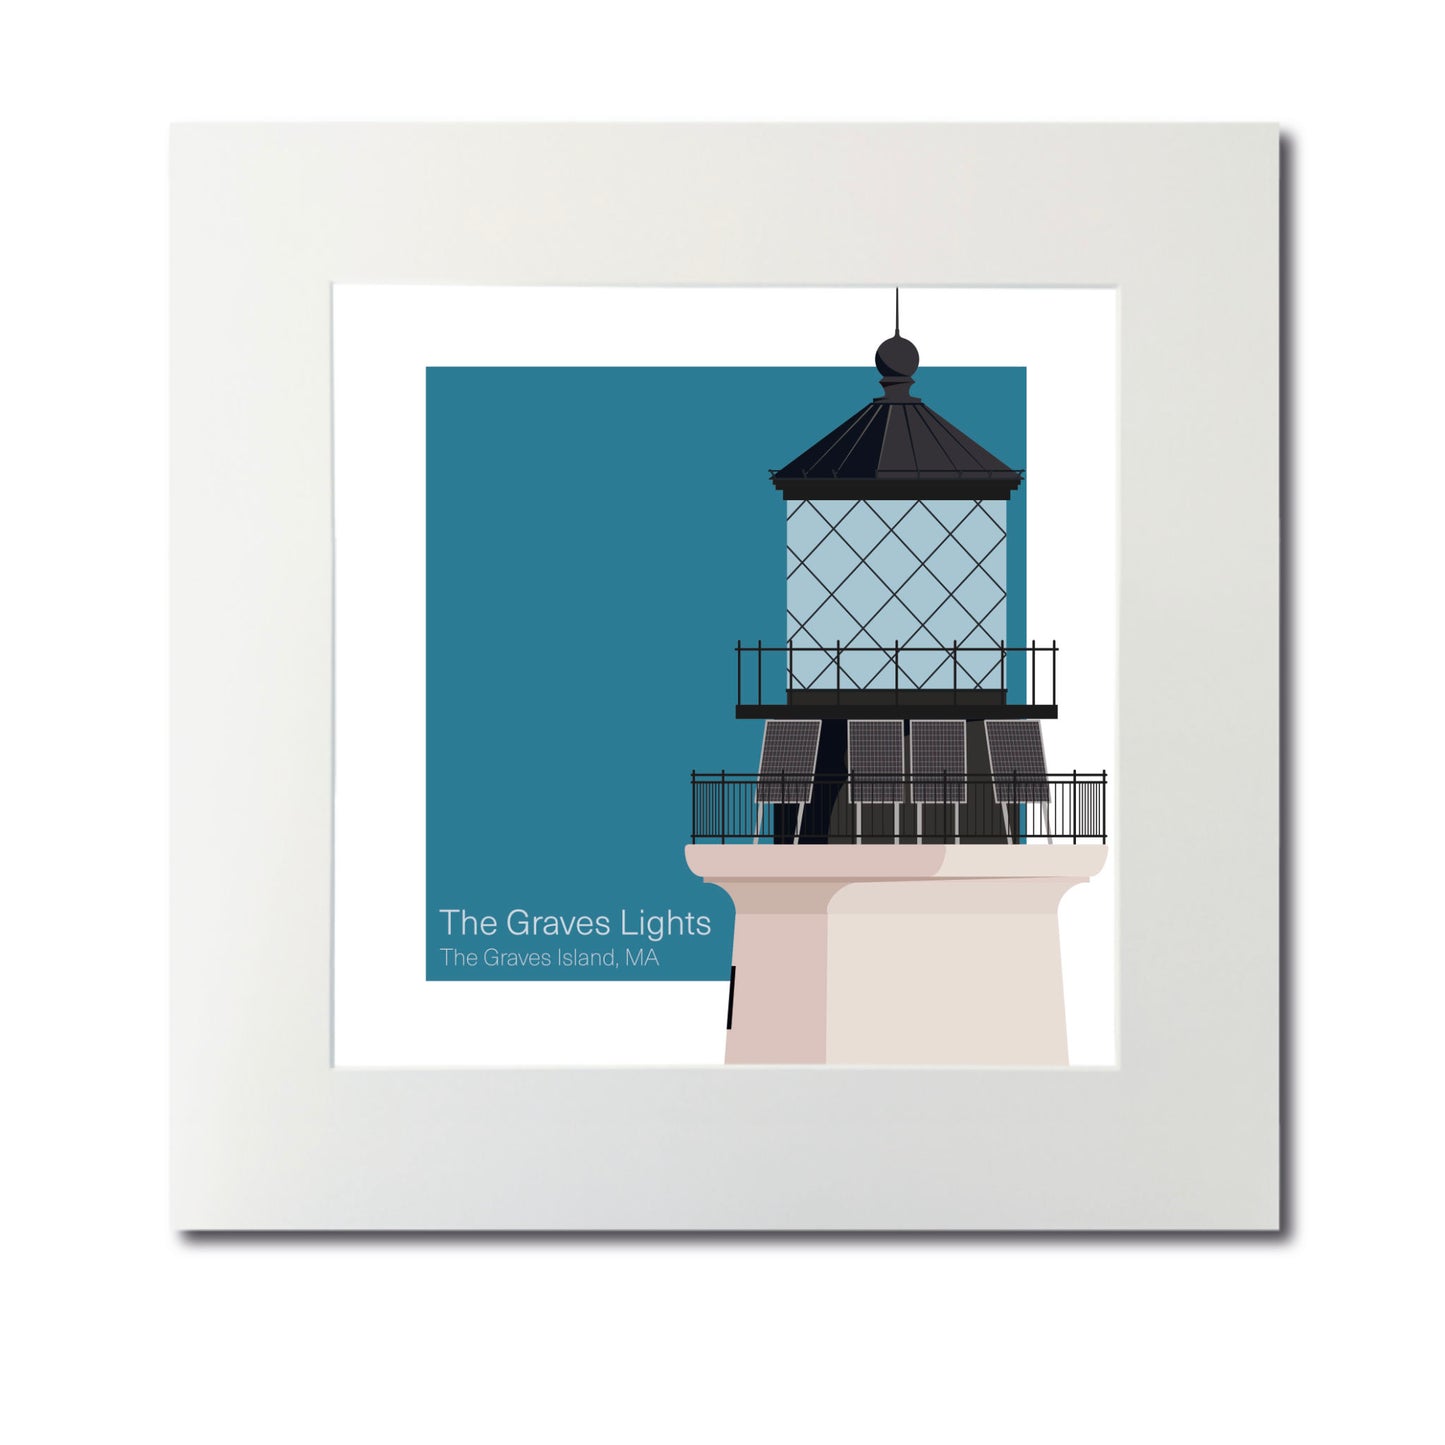 Illustration of the The Graves lighthouse, MA, USA. On a white background with aqua blue square as a backdrop., mounted and measuring 12"x12" (30x30cm).